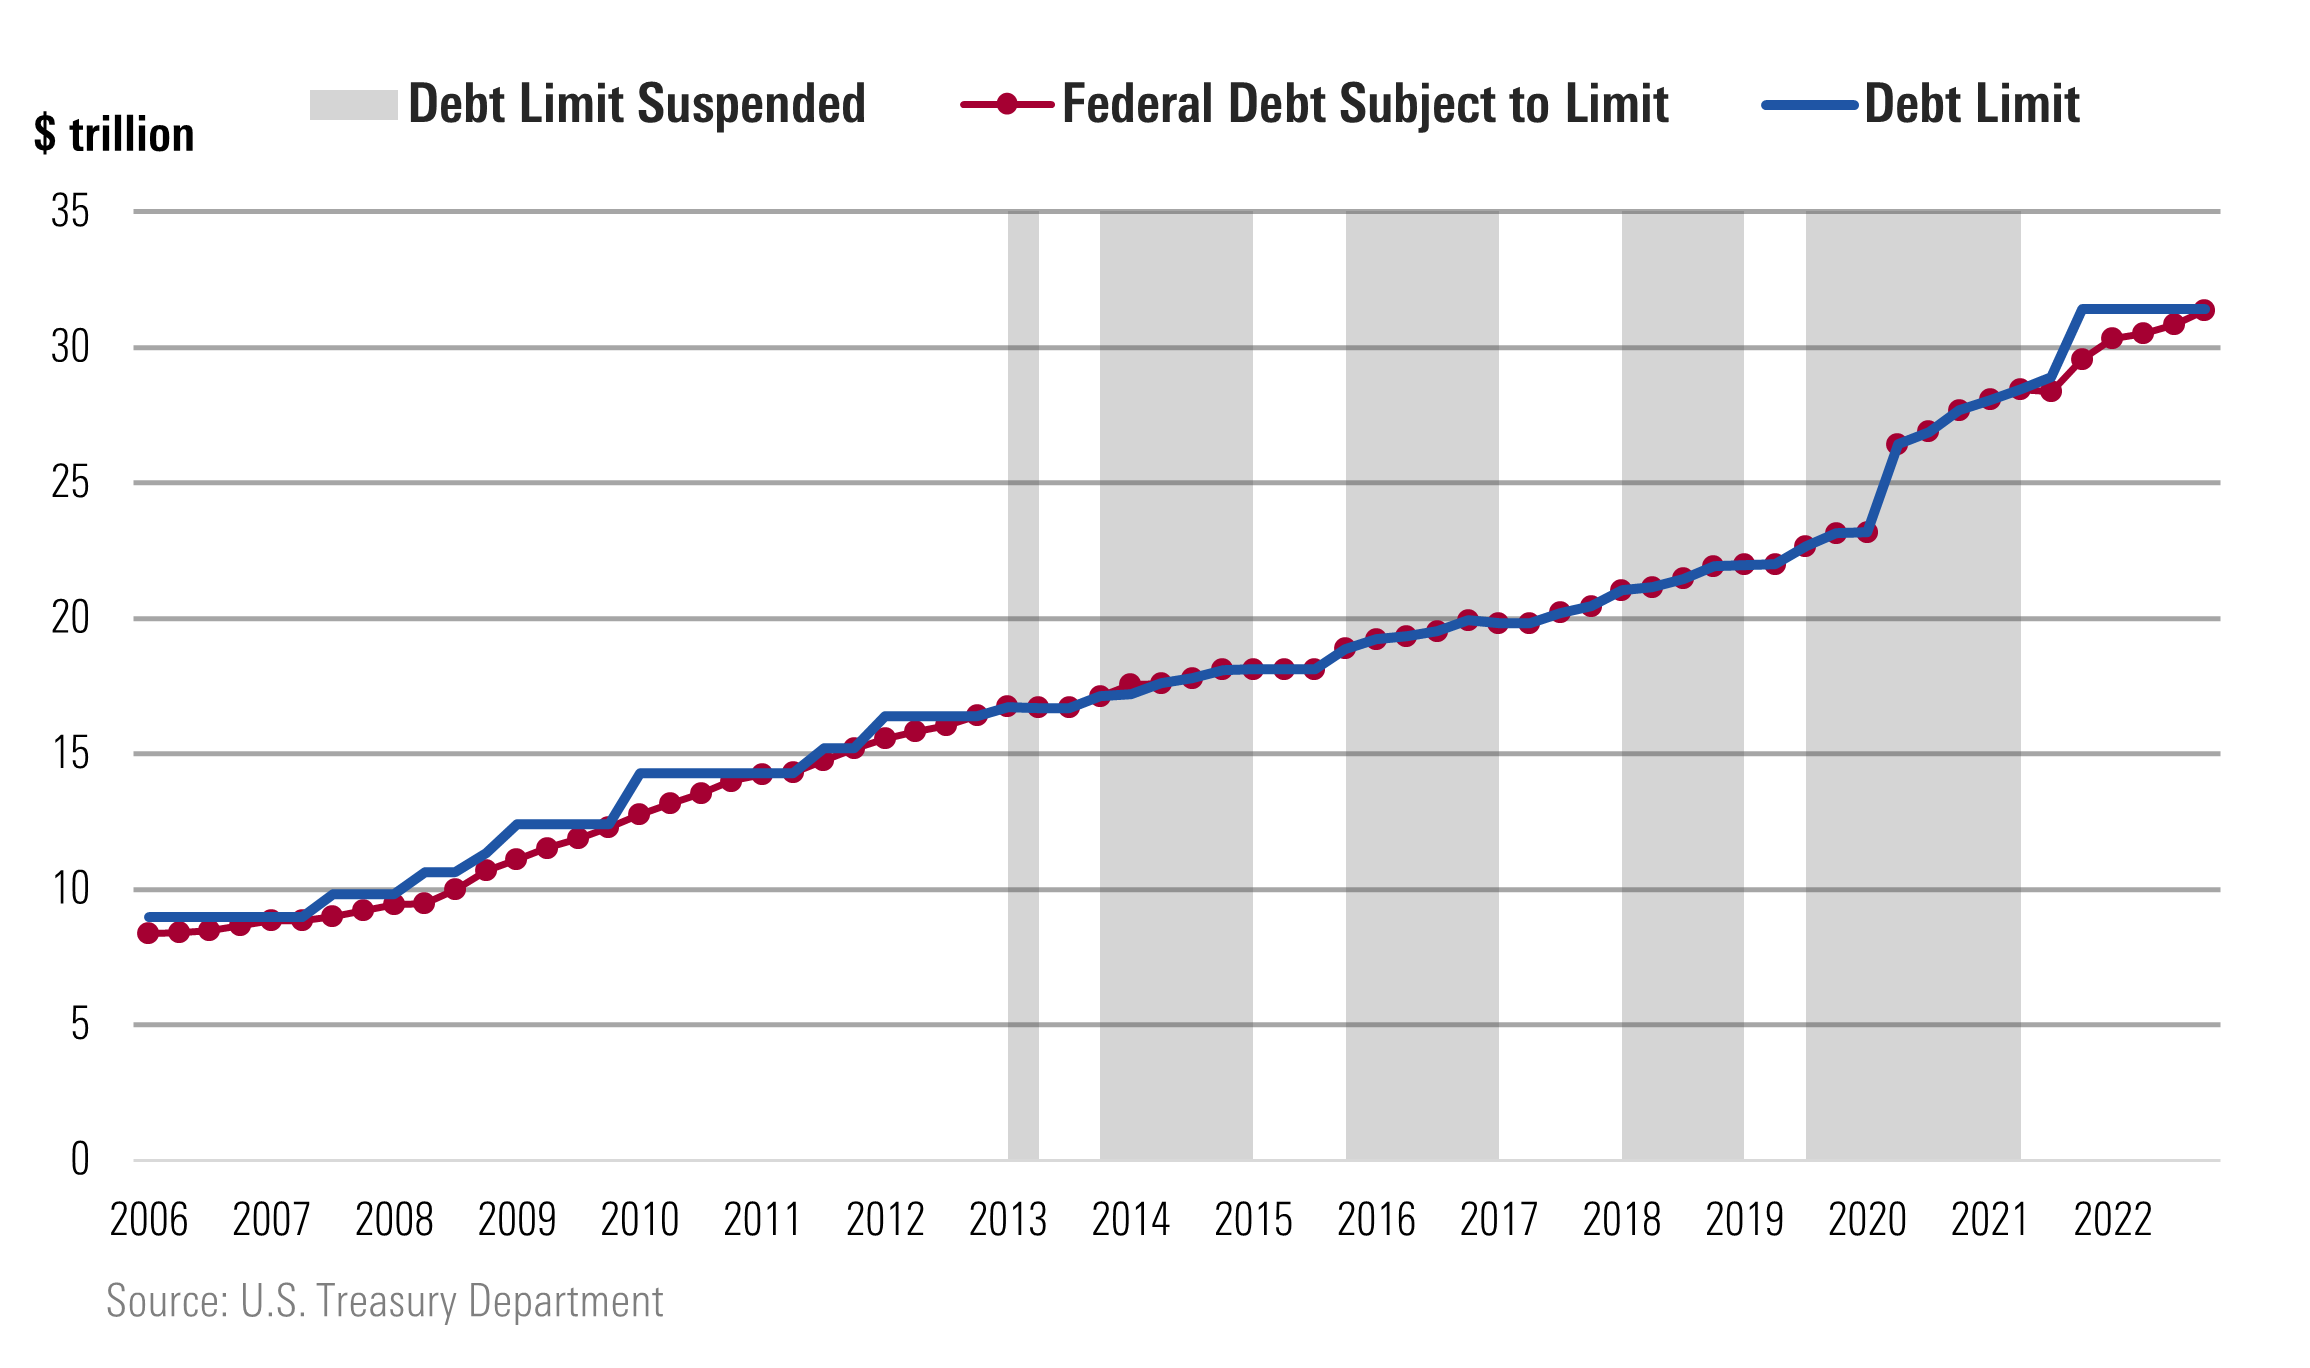 Chart showing U.S. federal debt and statutory debt limit